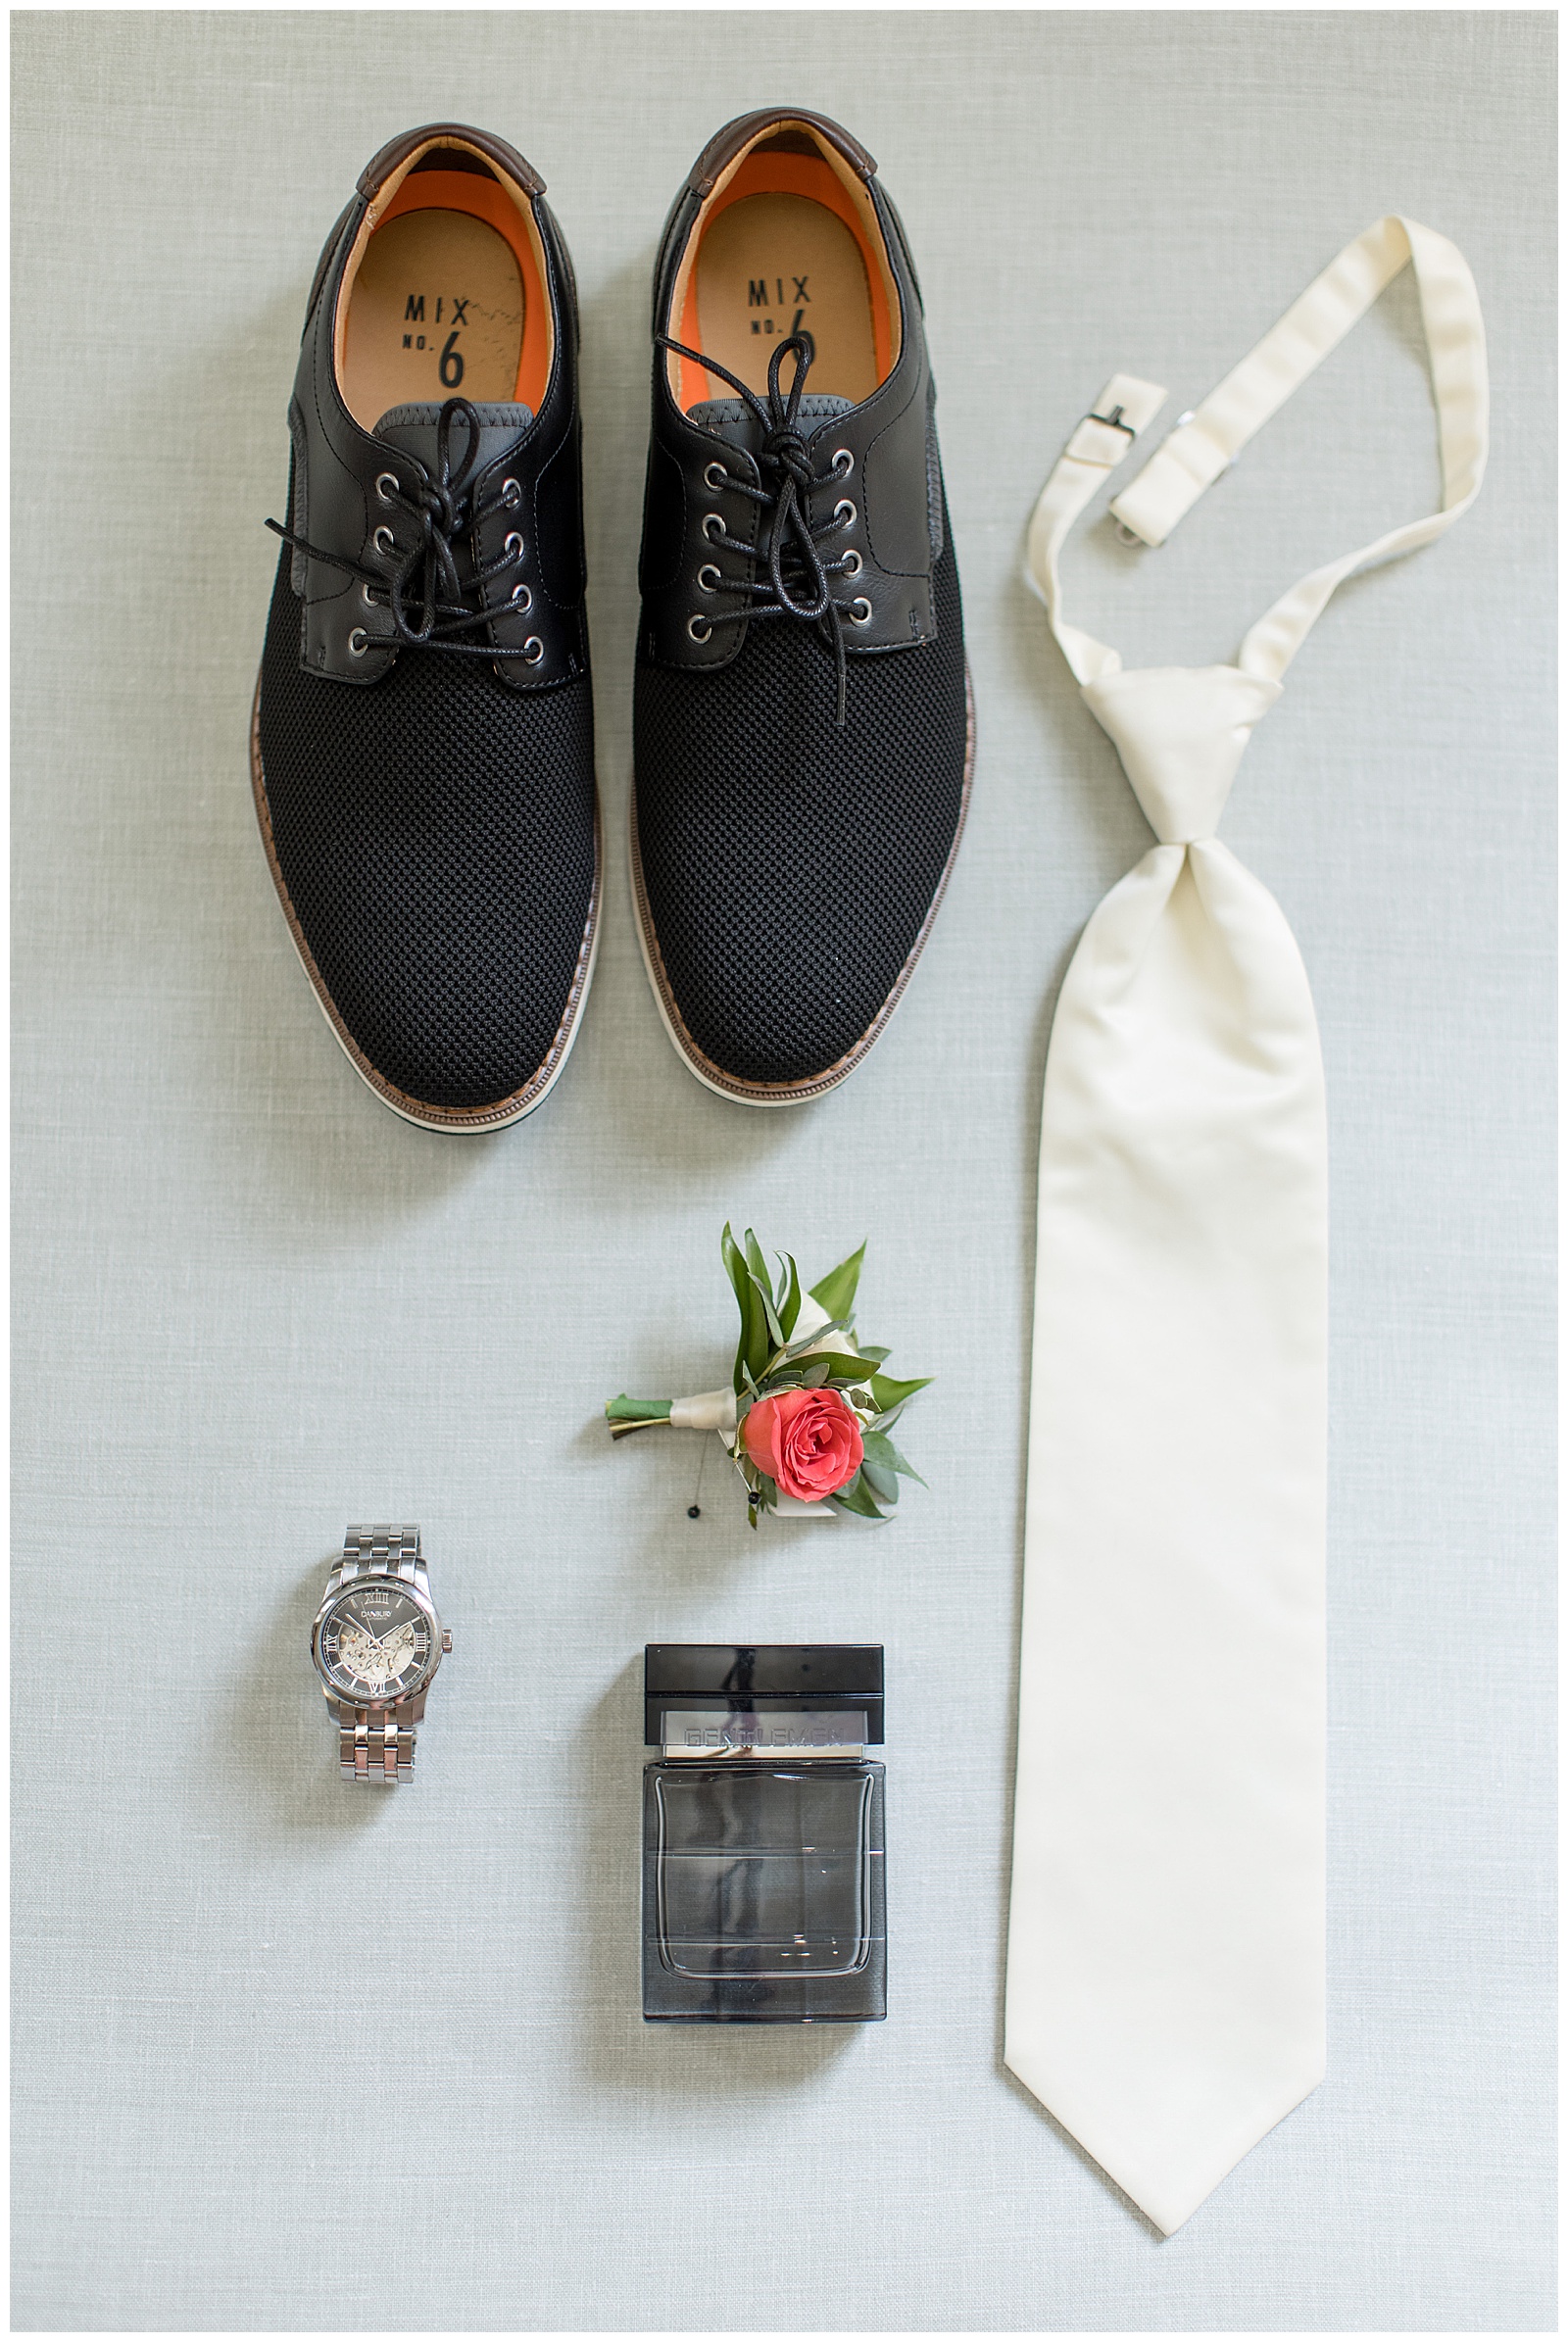 groom's black shoes displayed with his white tie, boutonniere, wrist watch and bottle of cologne in lancaster county